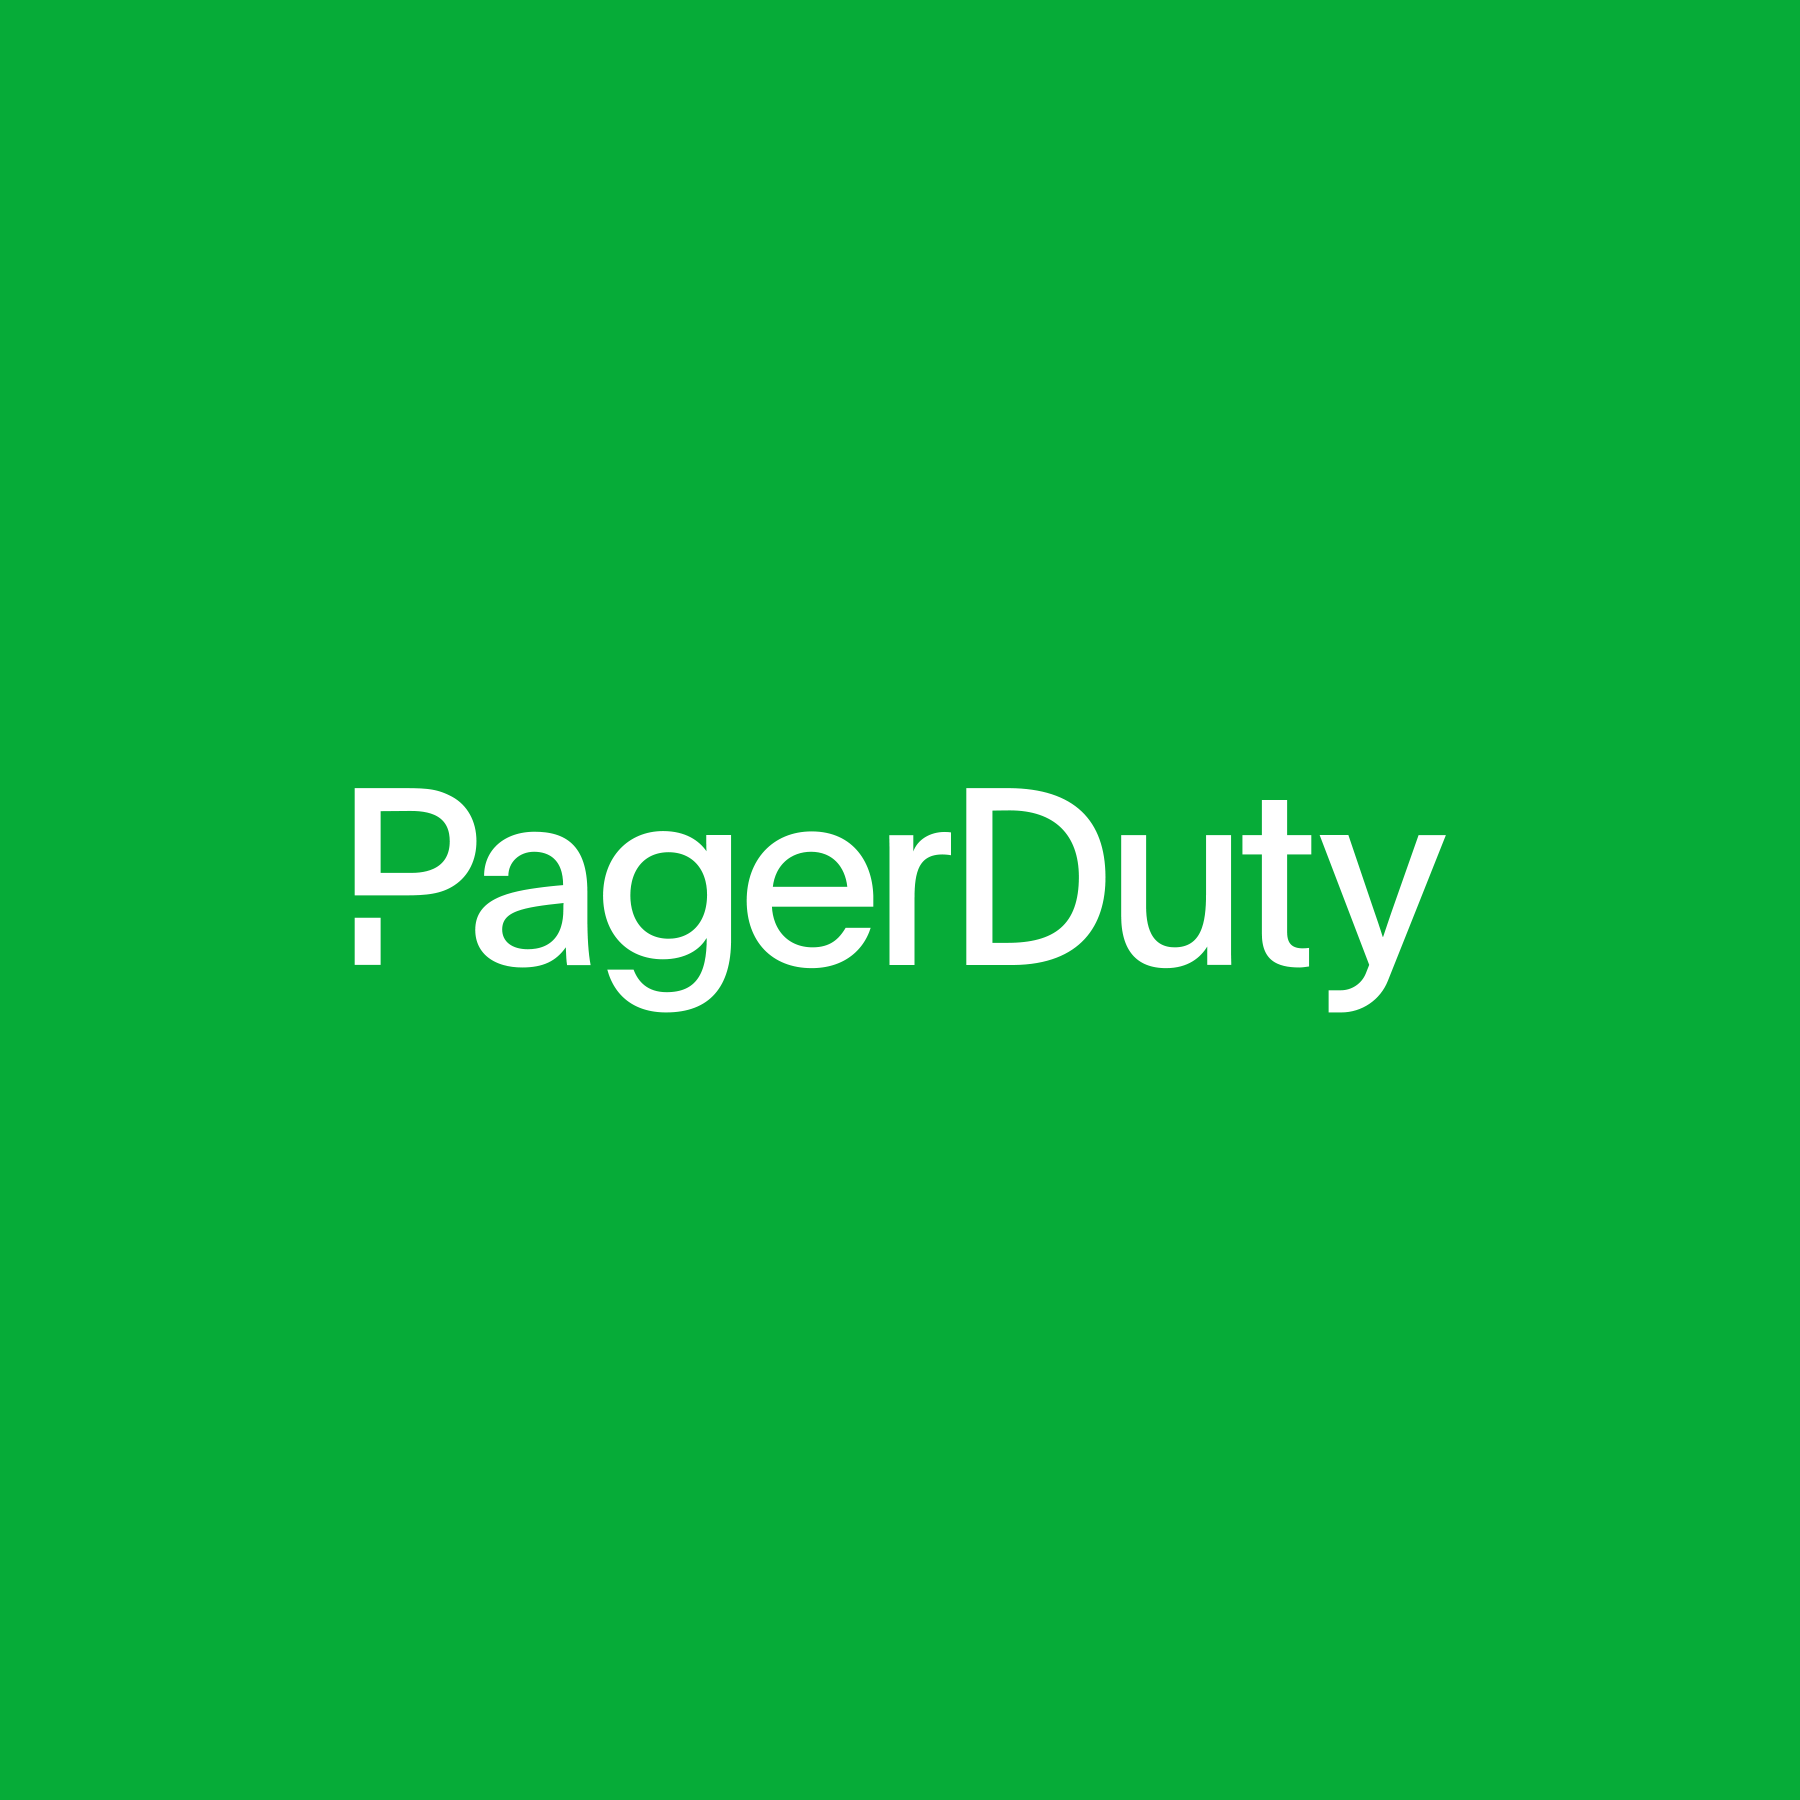 PagerDuty Shares Gain Post Solid 31% Top-Line Growth In Q3